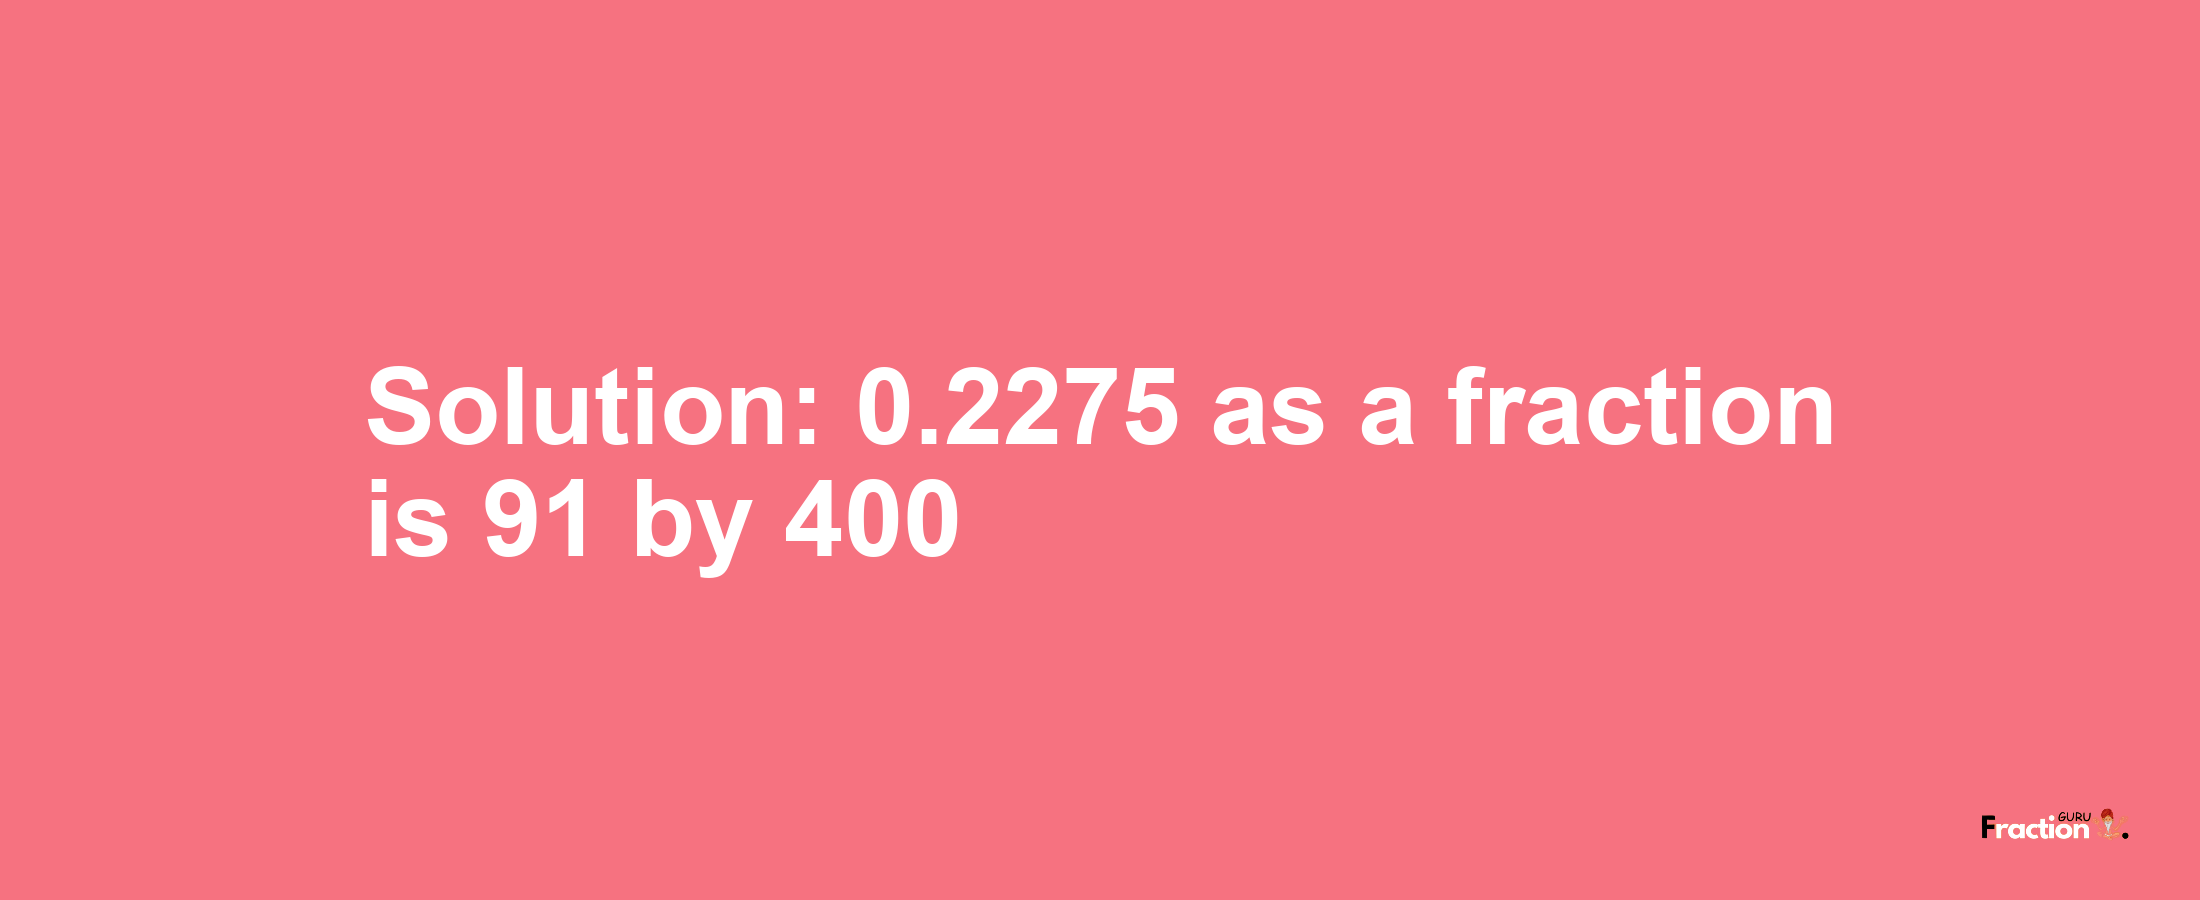 Solution:0.2275 as a fraction is 91/400